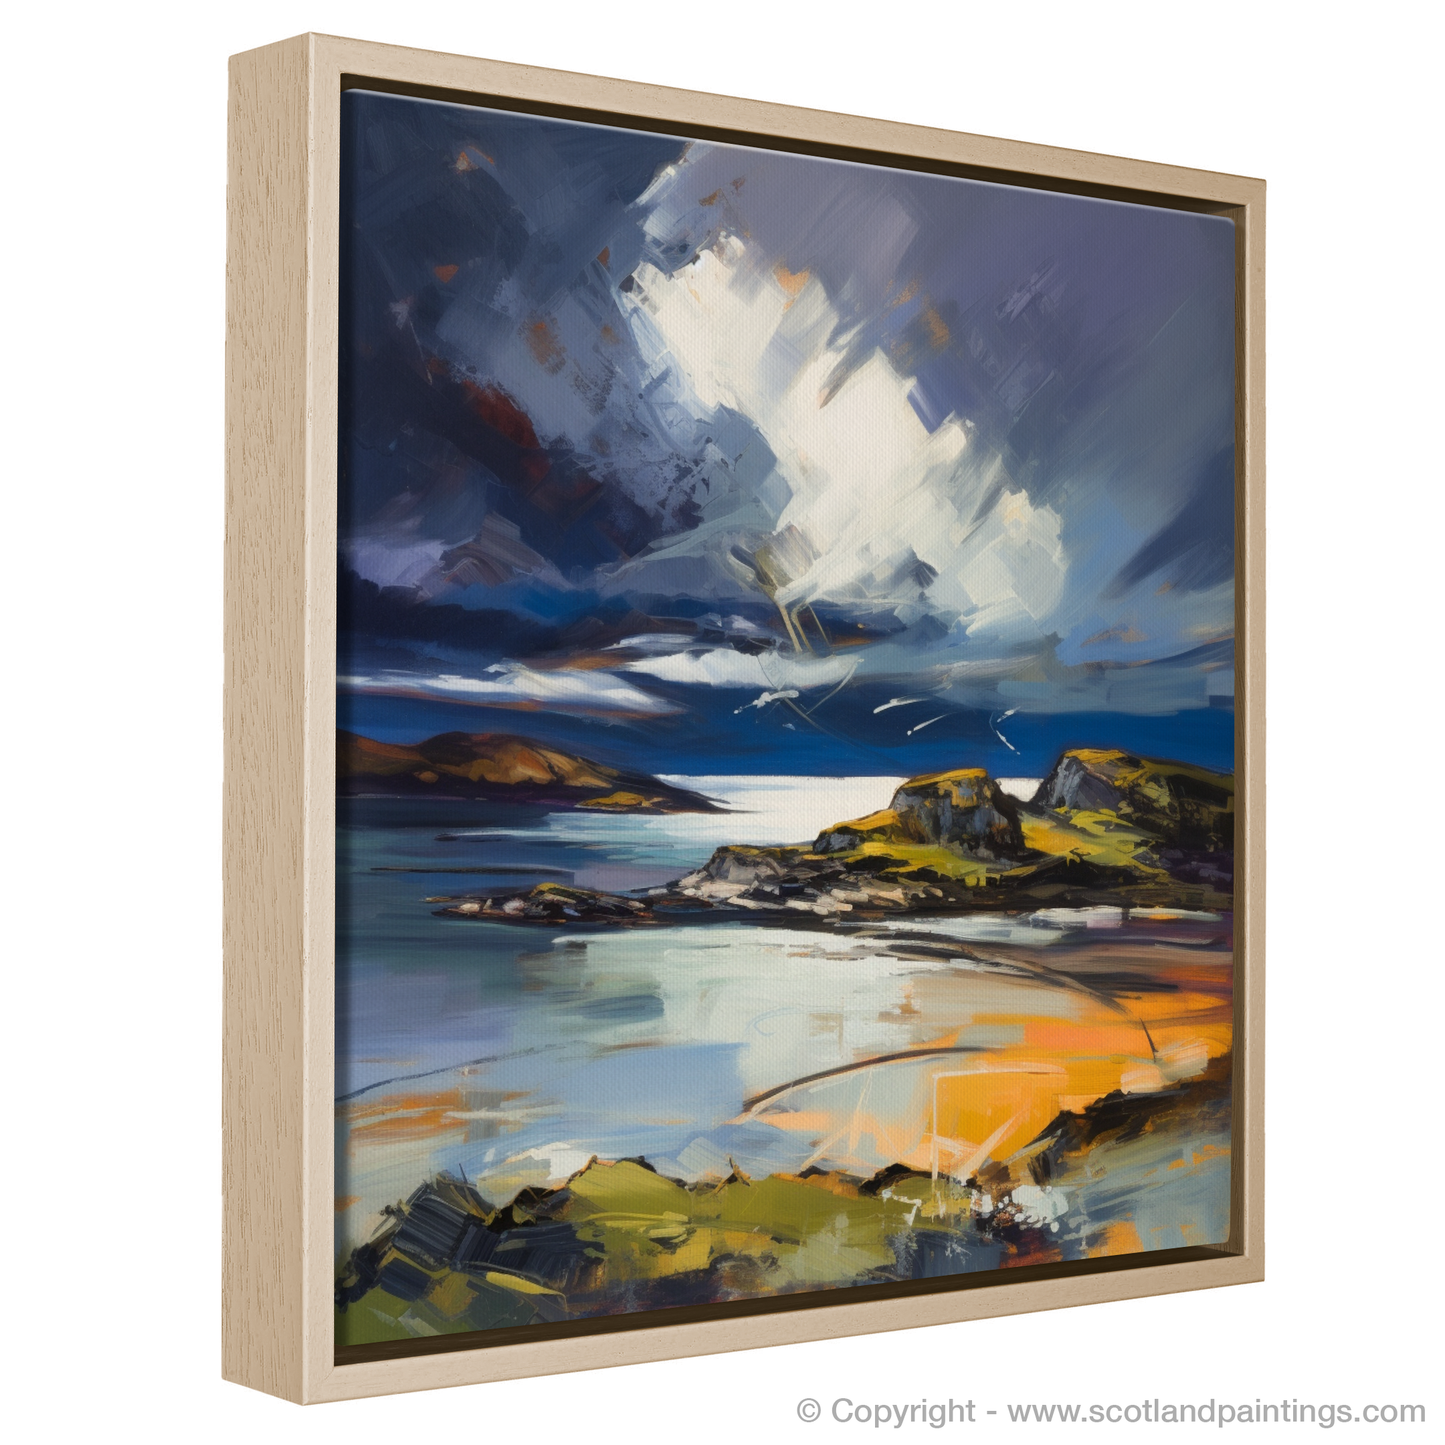 Painting and Art Print of Lochinver Bay with a stormy sky entitled "Tempestuous Skies over Lochinver Bay".